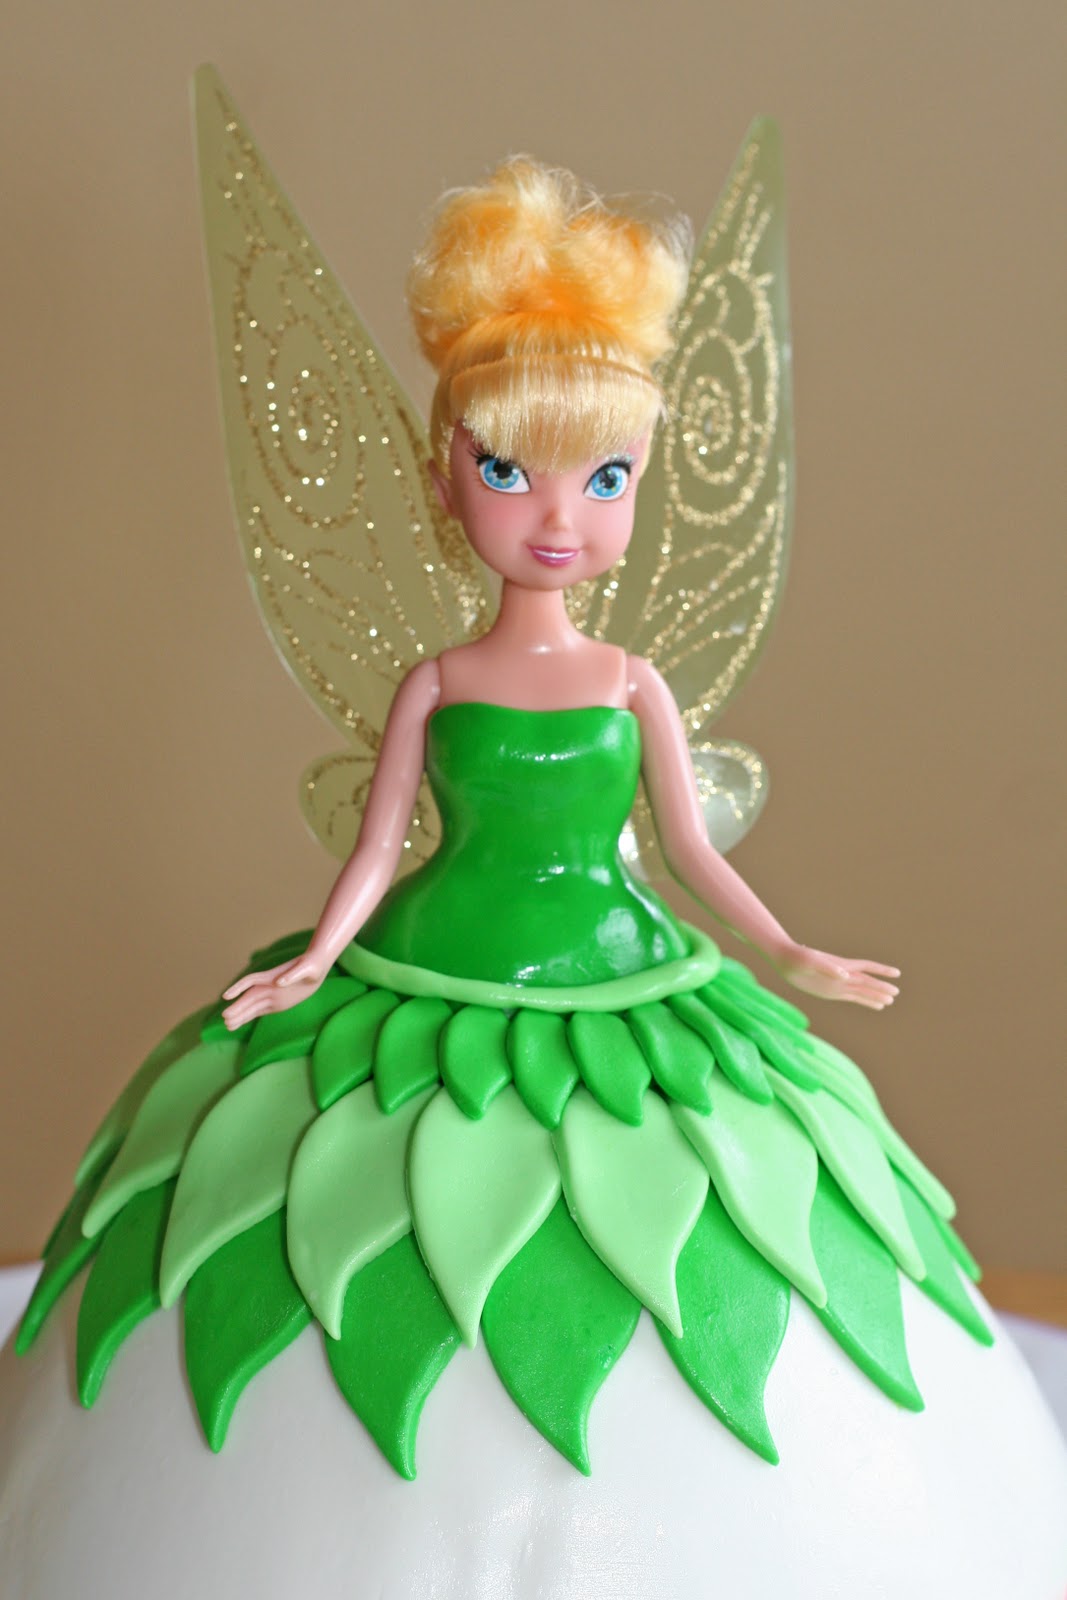 Cakes by Nicola: Tinkerbell